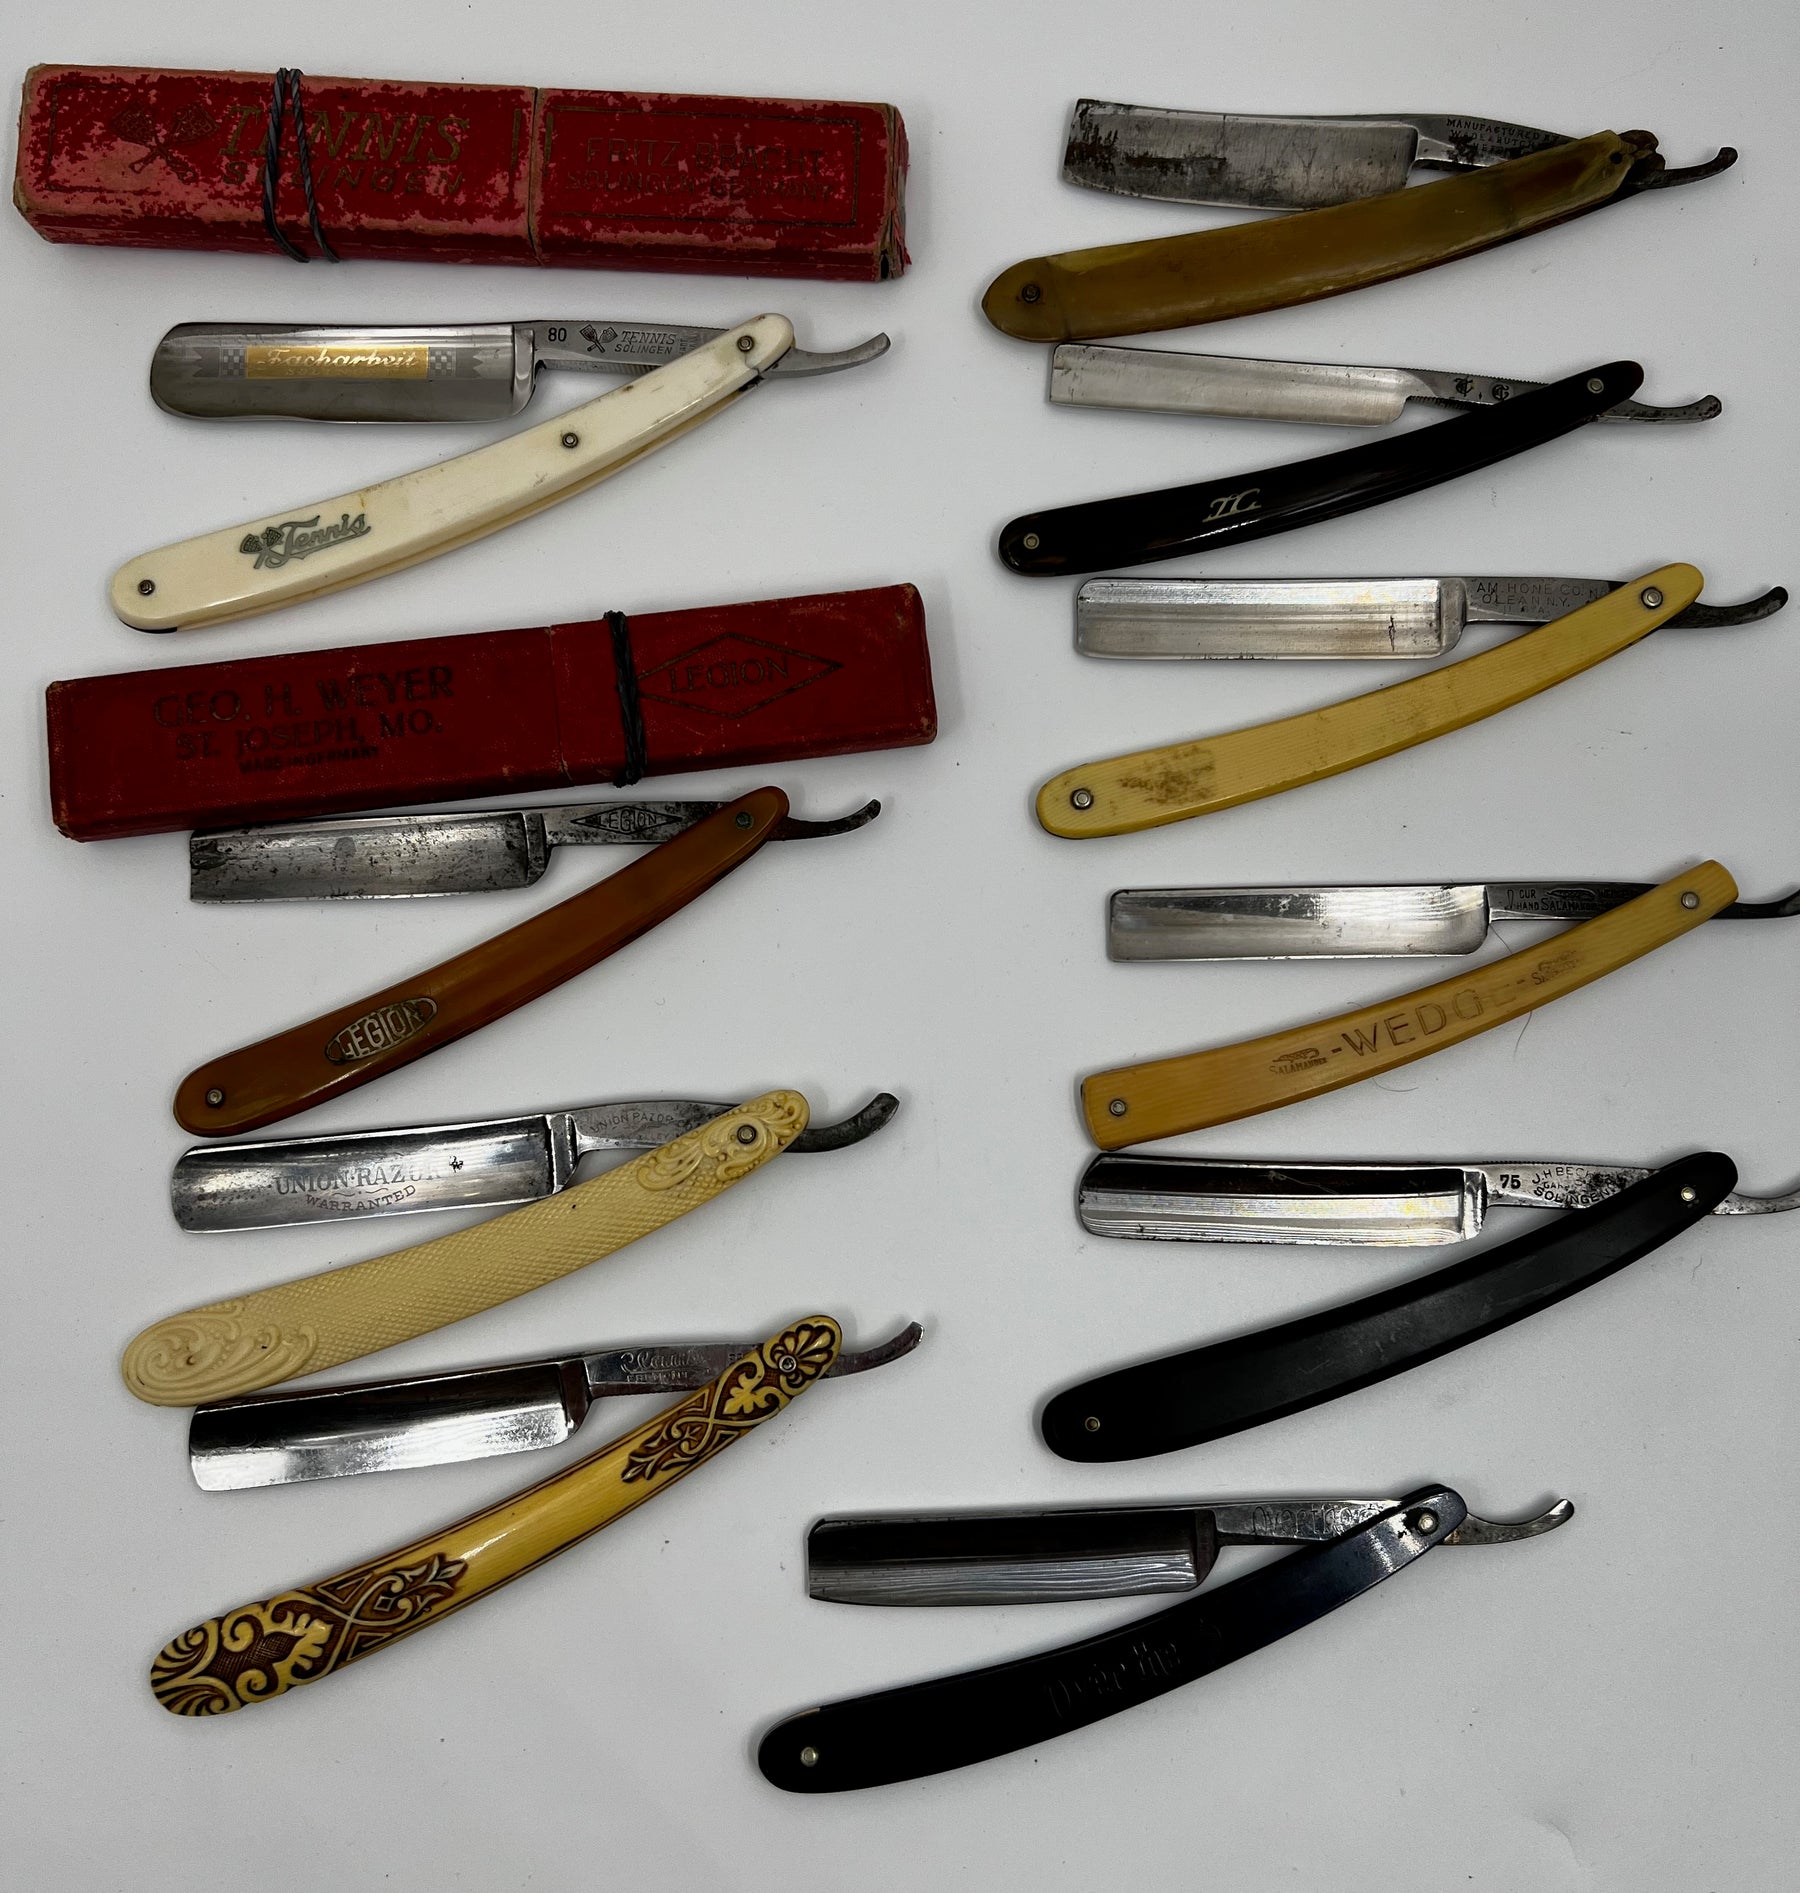 Vintage 10 Straight Razor Lot #13 - May Contain Sheffield, Solingen, Japanese & USA makers, as pictured